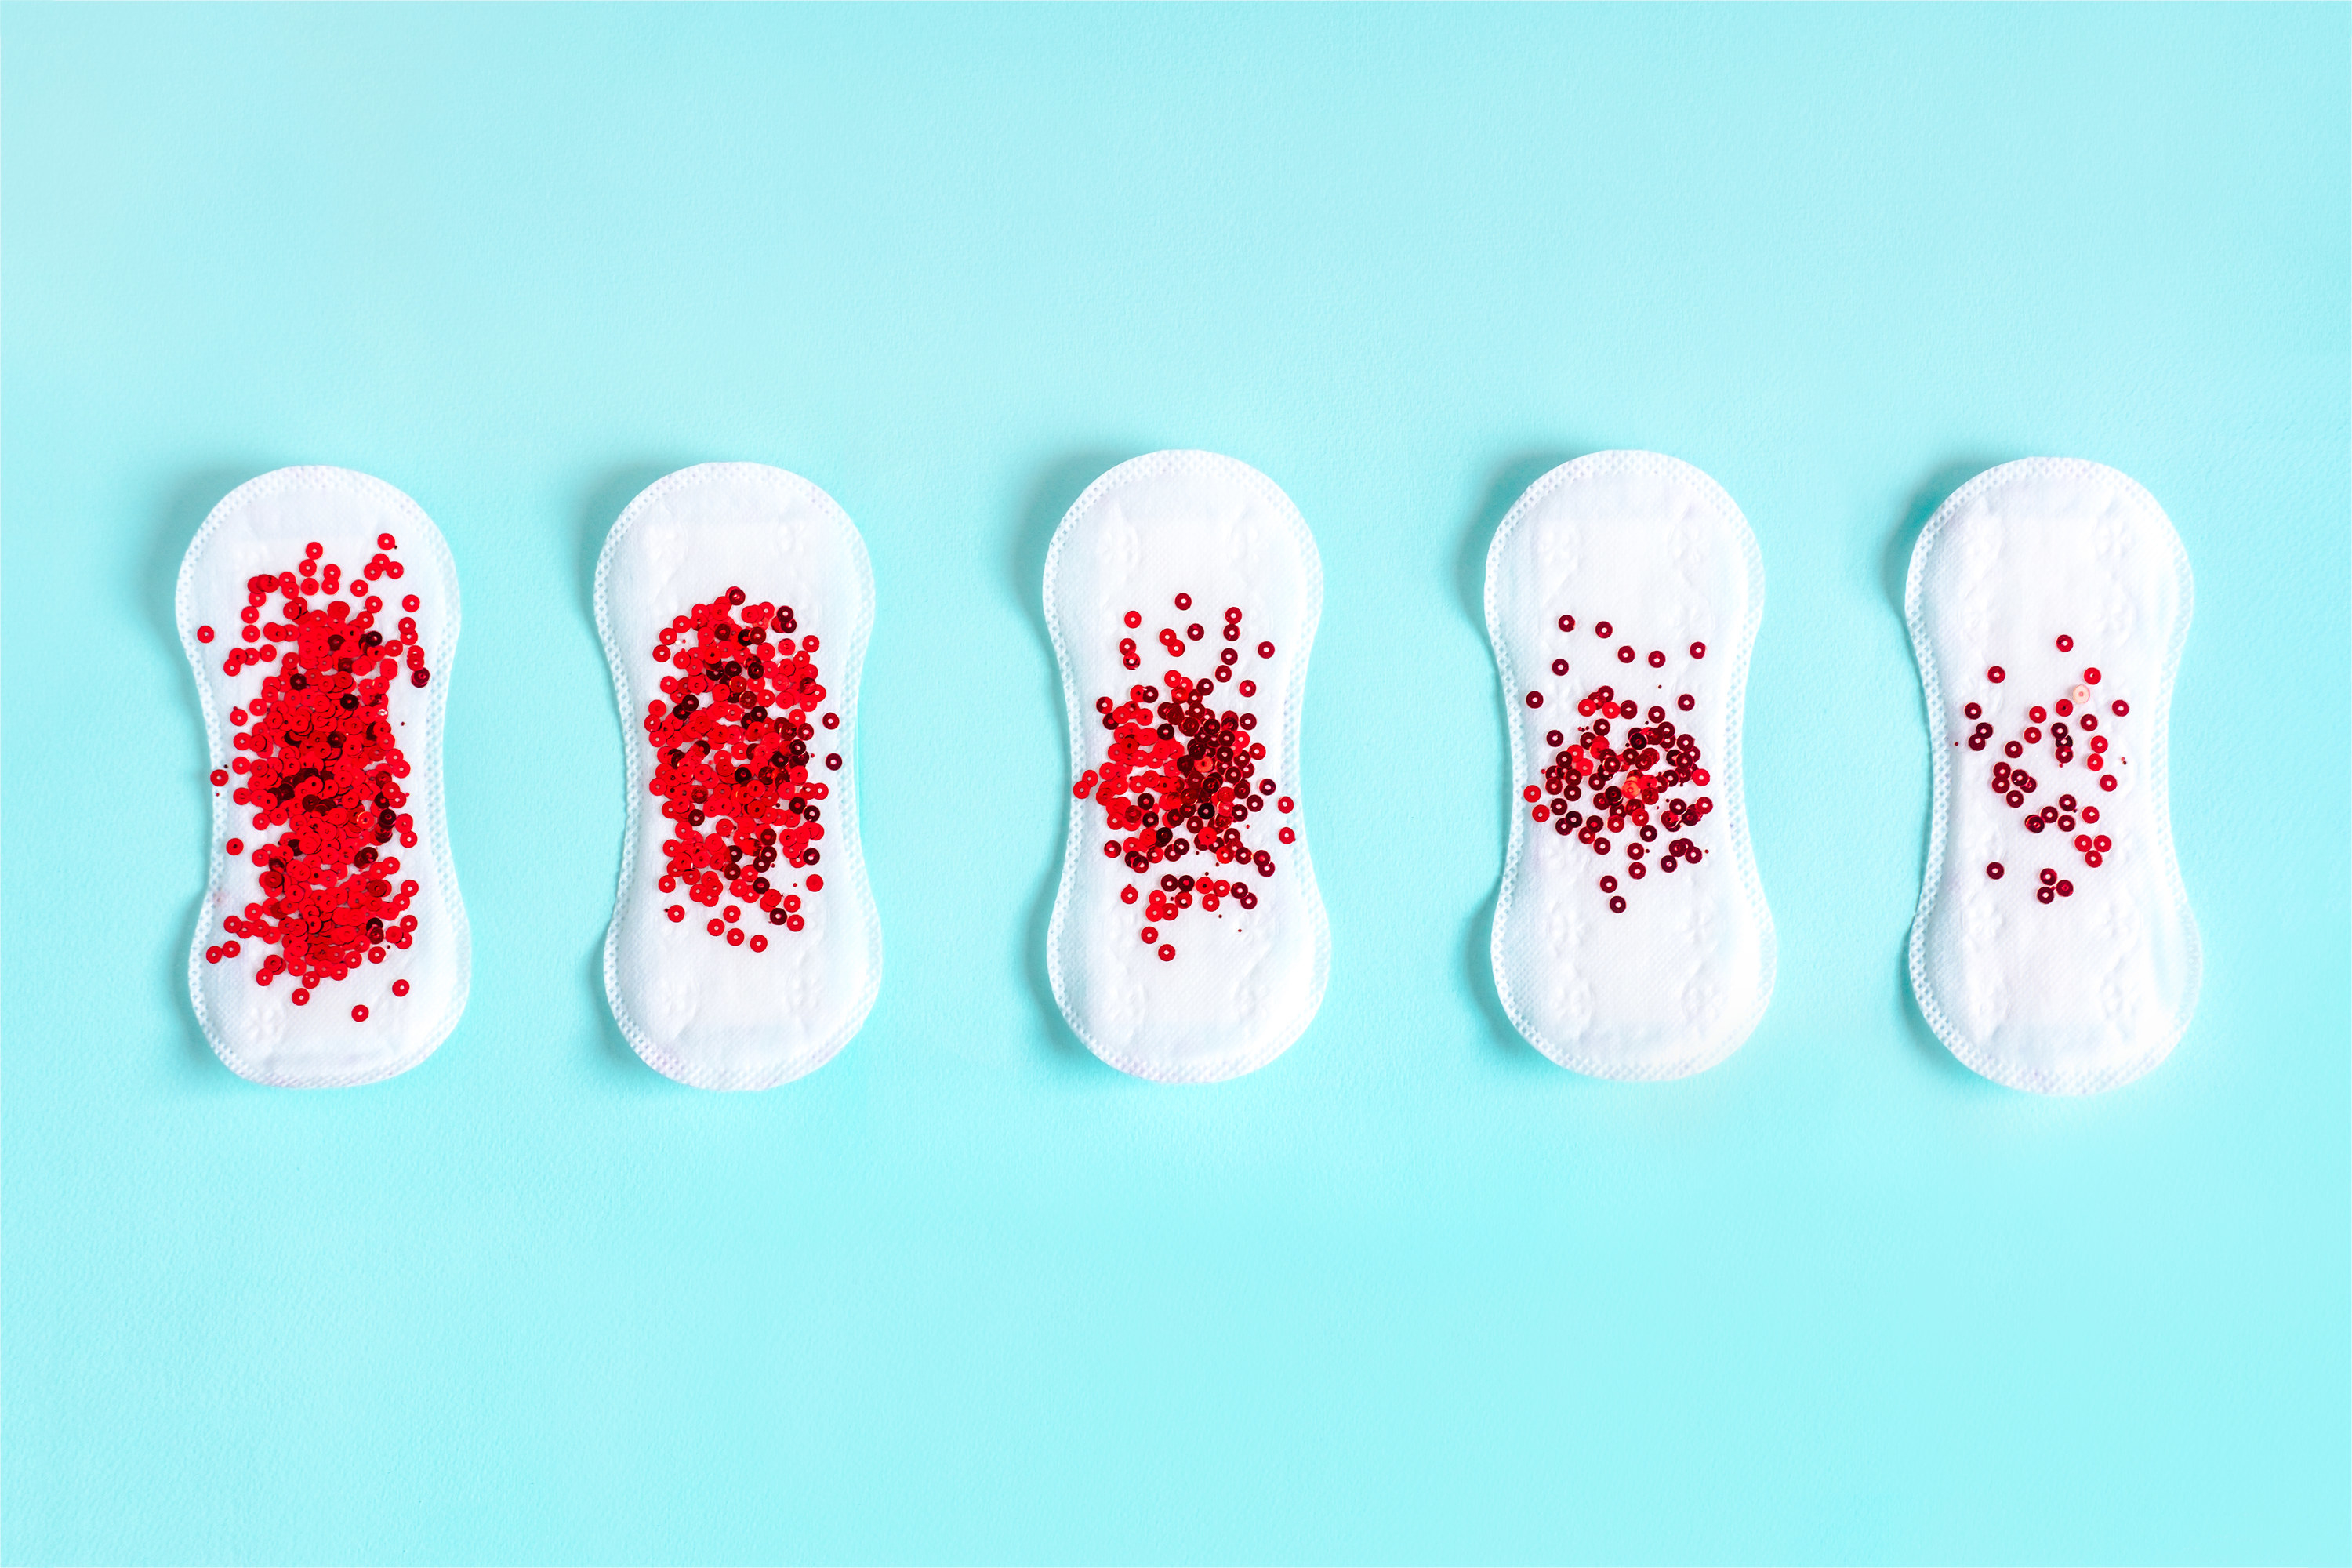 A line of sanitary pads with different amounts of red sequins designed to look like blood